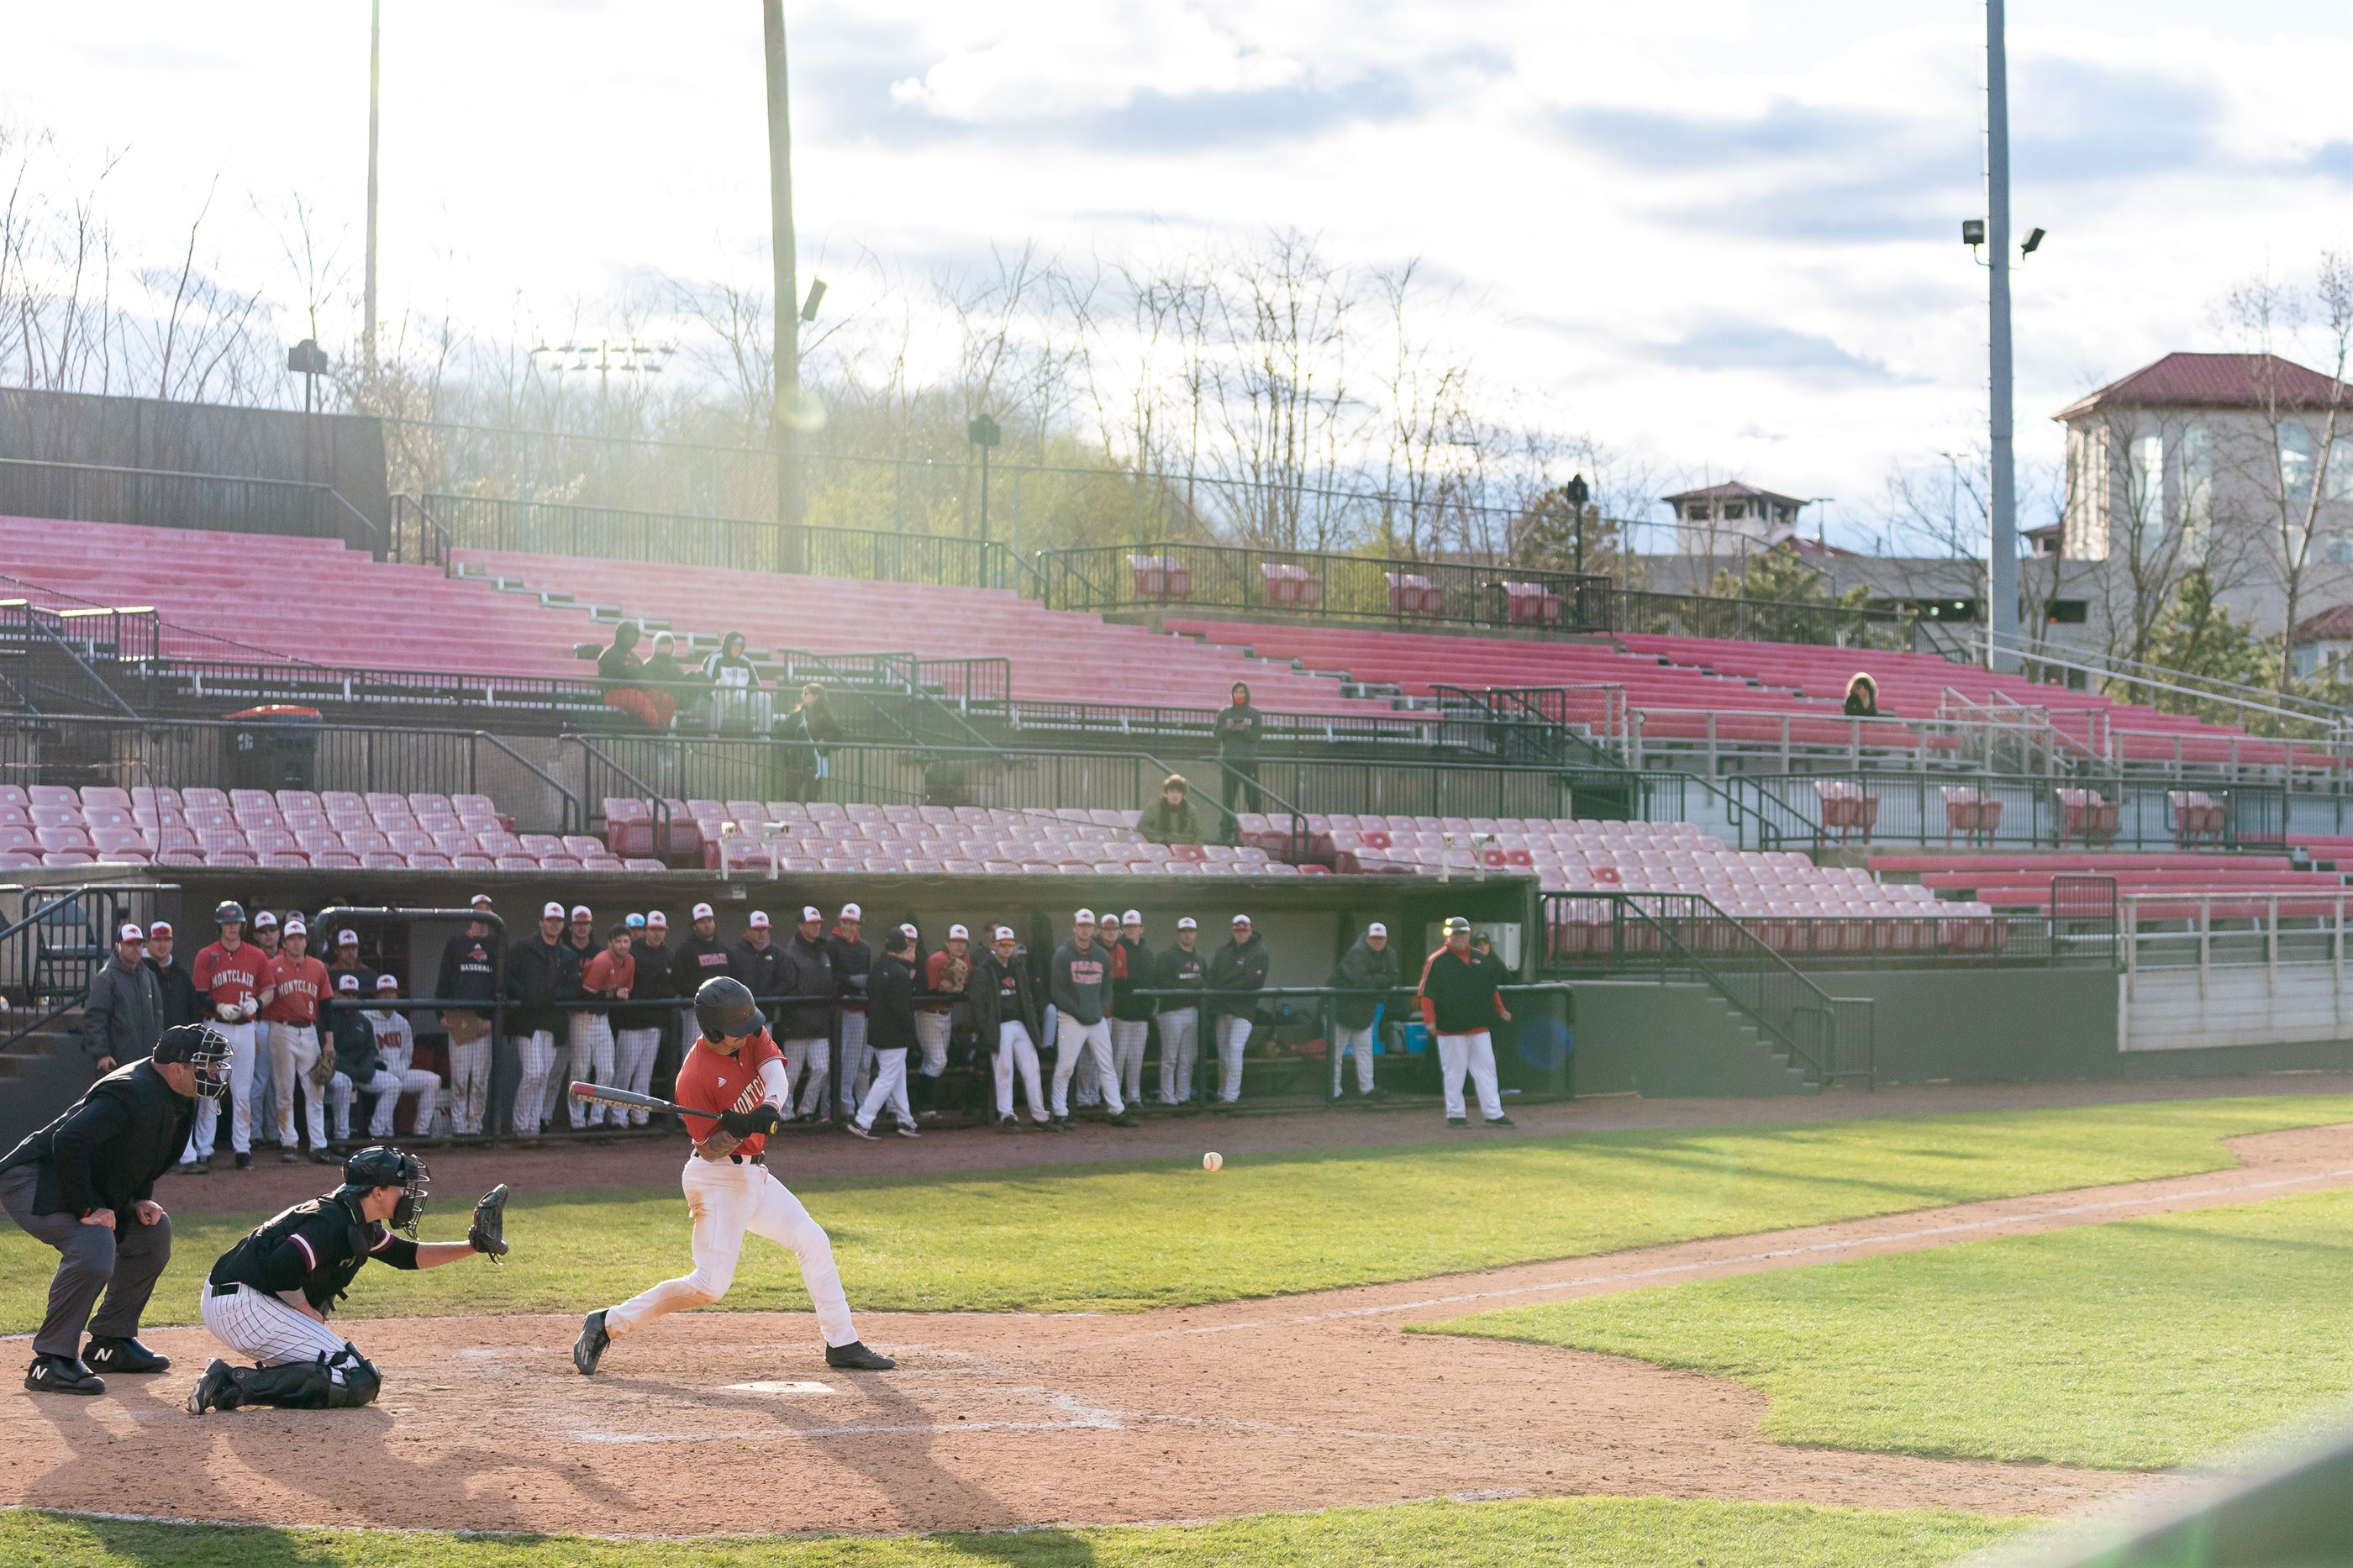 The Montclair State University baseball team faced off against Ramapo College in a doubleheader on April 10. Chris Krusberg | The Montclarion